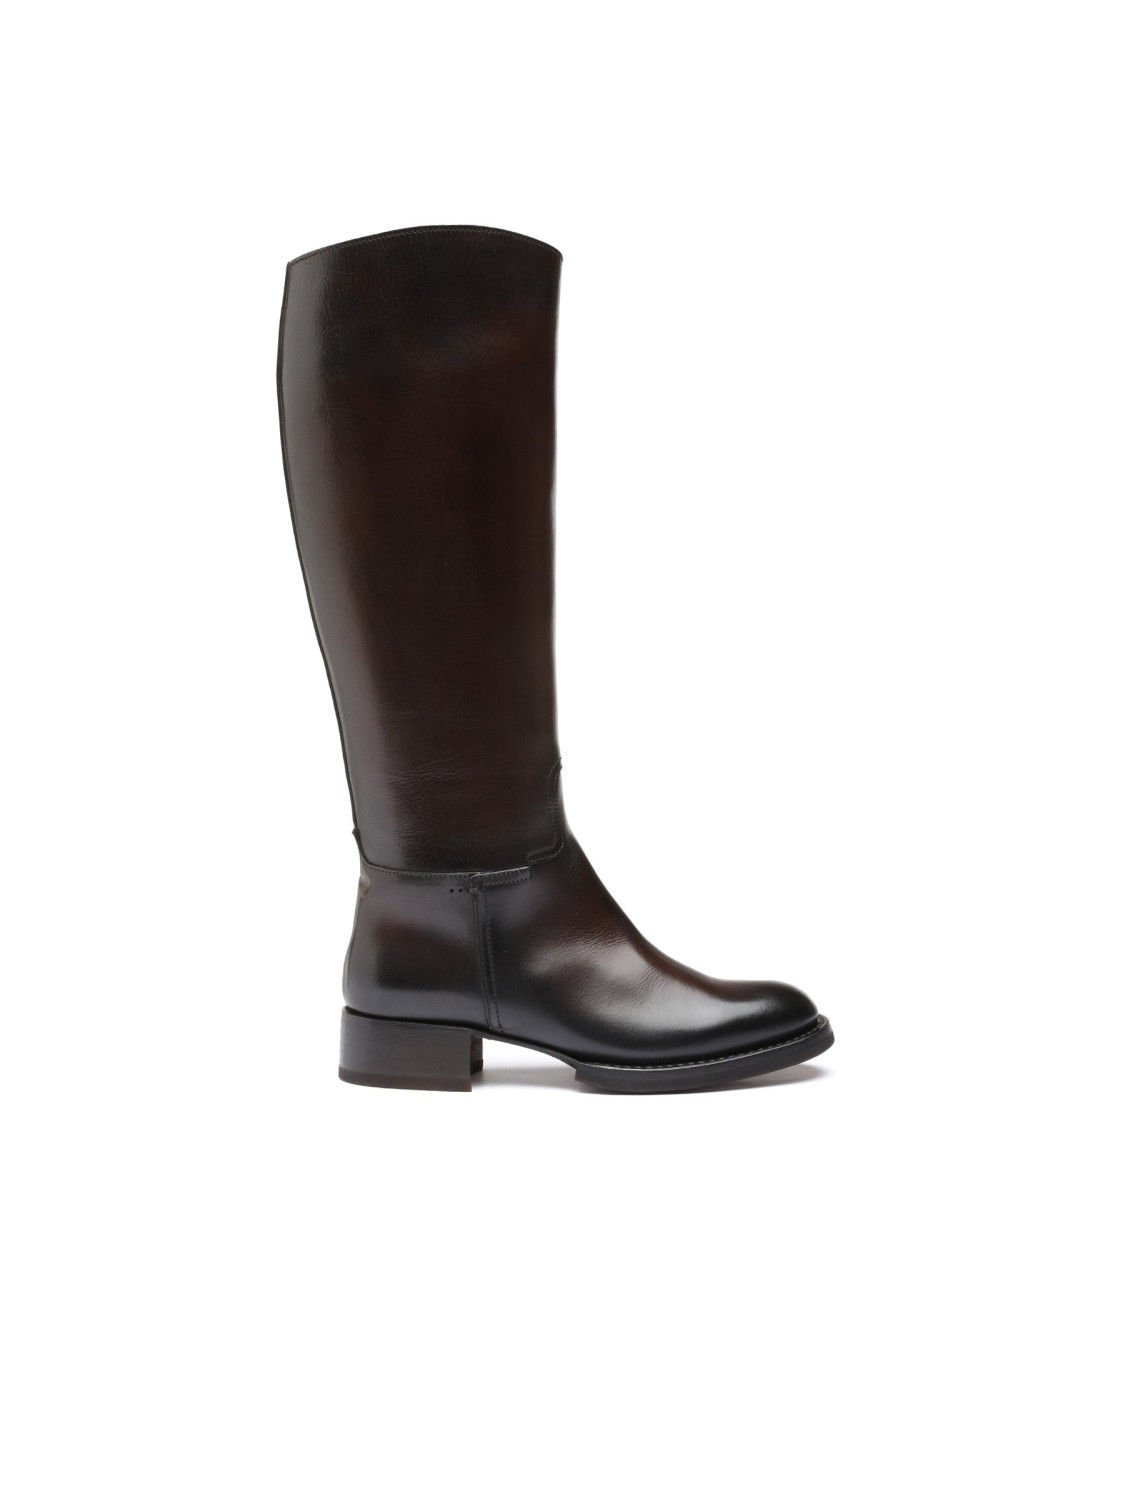 Firenze brown leather boots